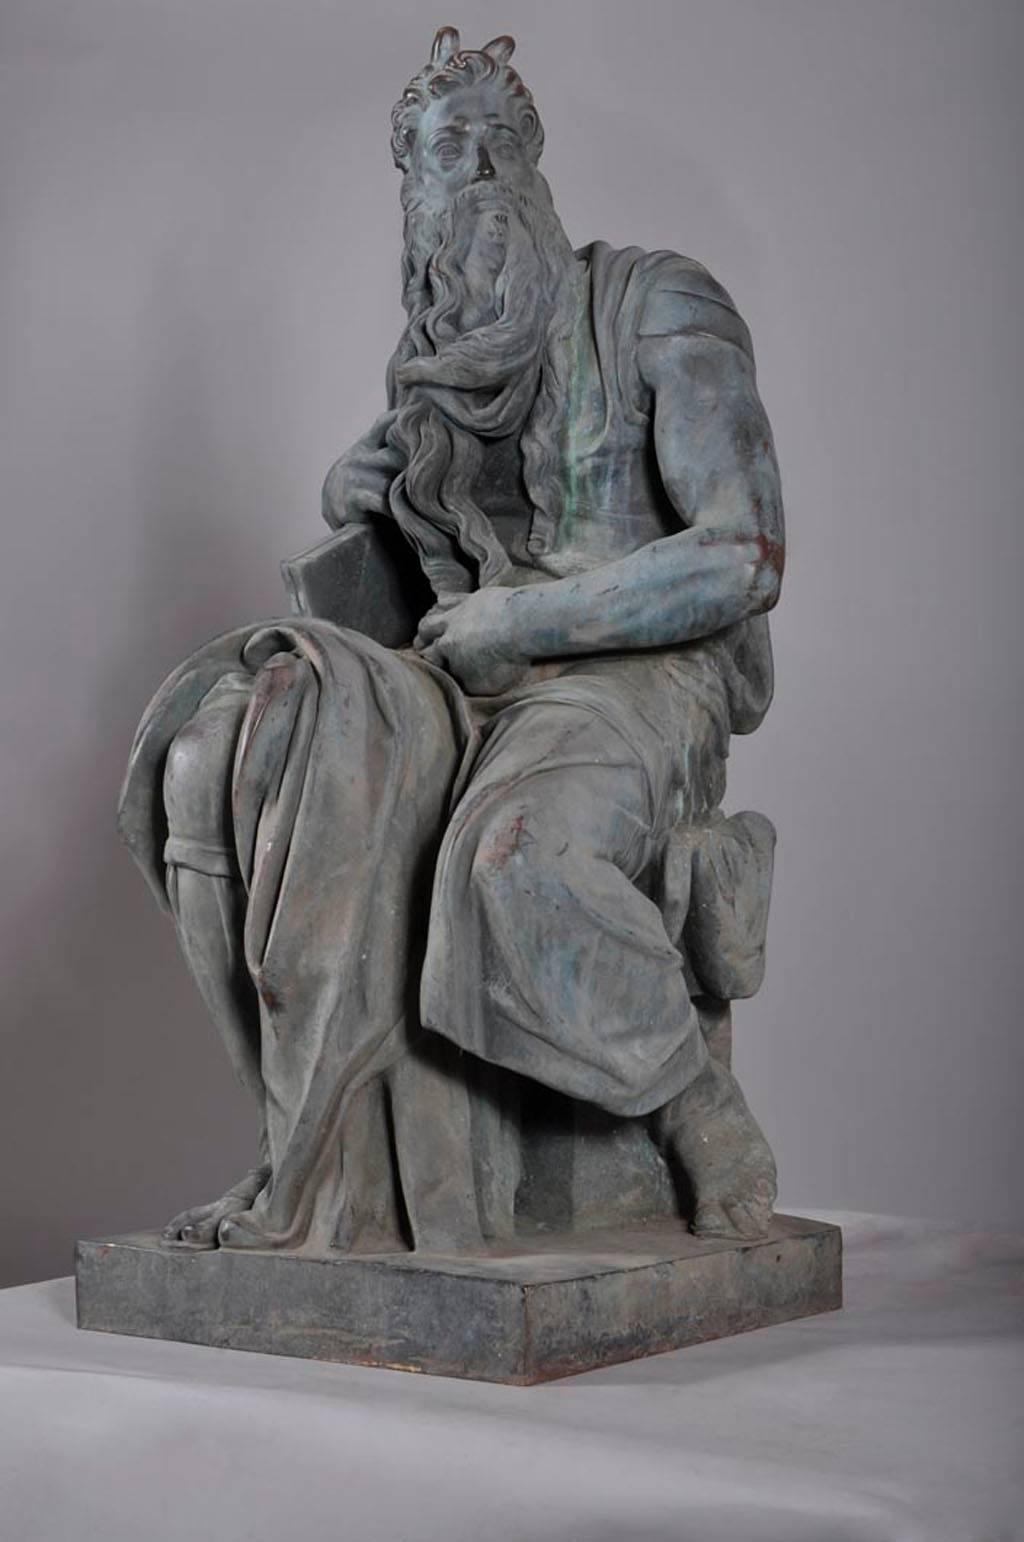 Renaissance Statue of Moses, After Michelangelo (1475-1564), Made Out of Bronze